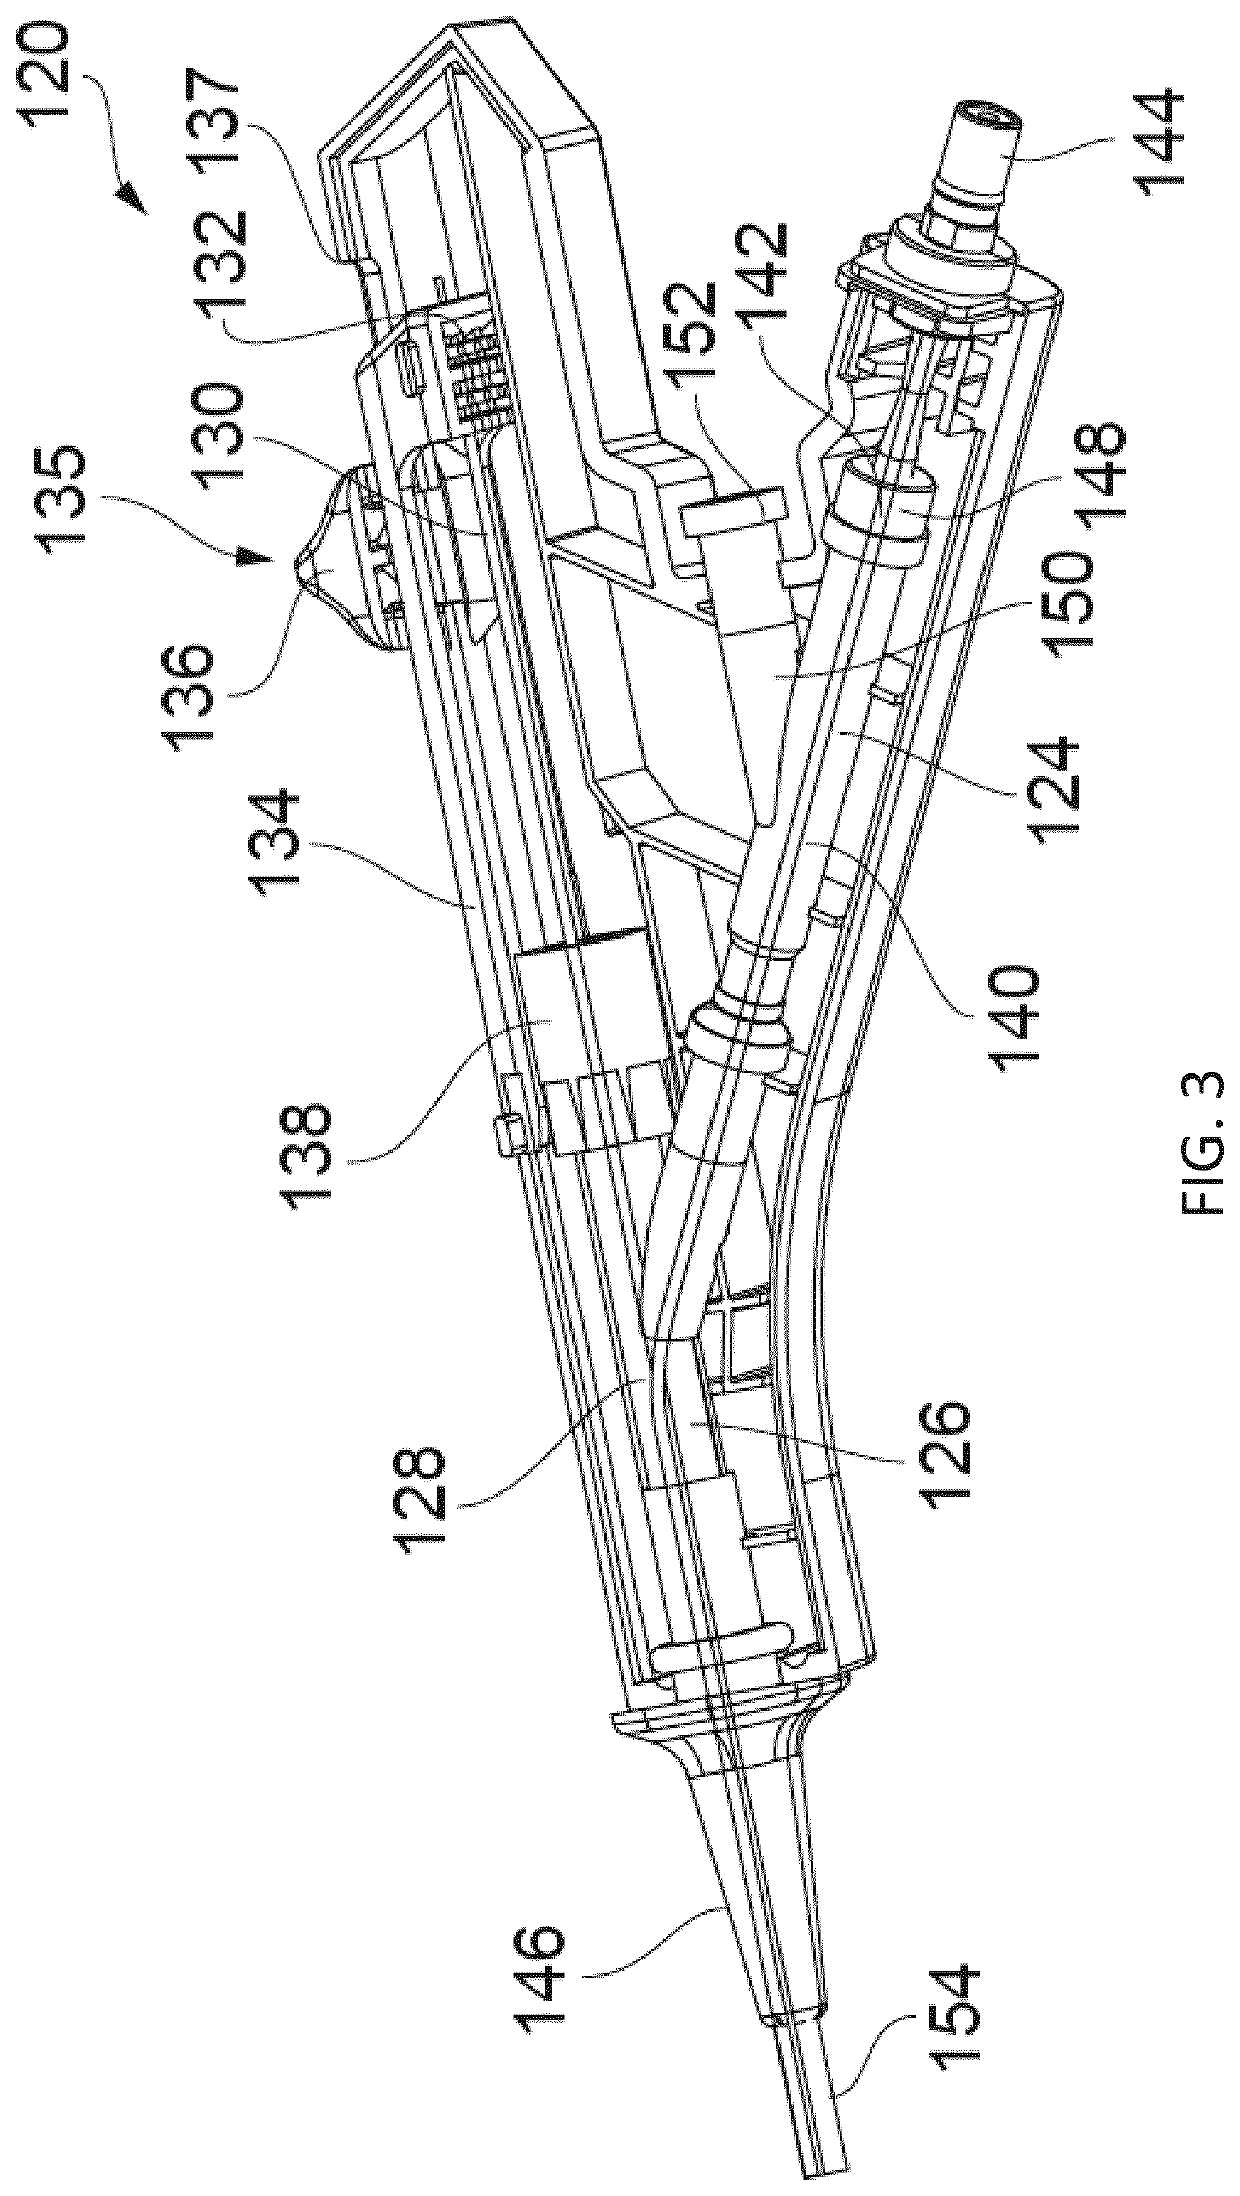 Interface joint for interconnecting an electrosurgical generator and an electrosurgical instrument